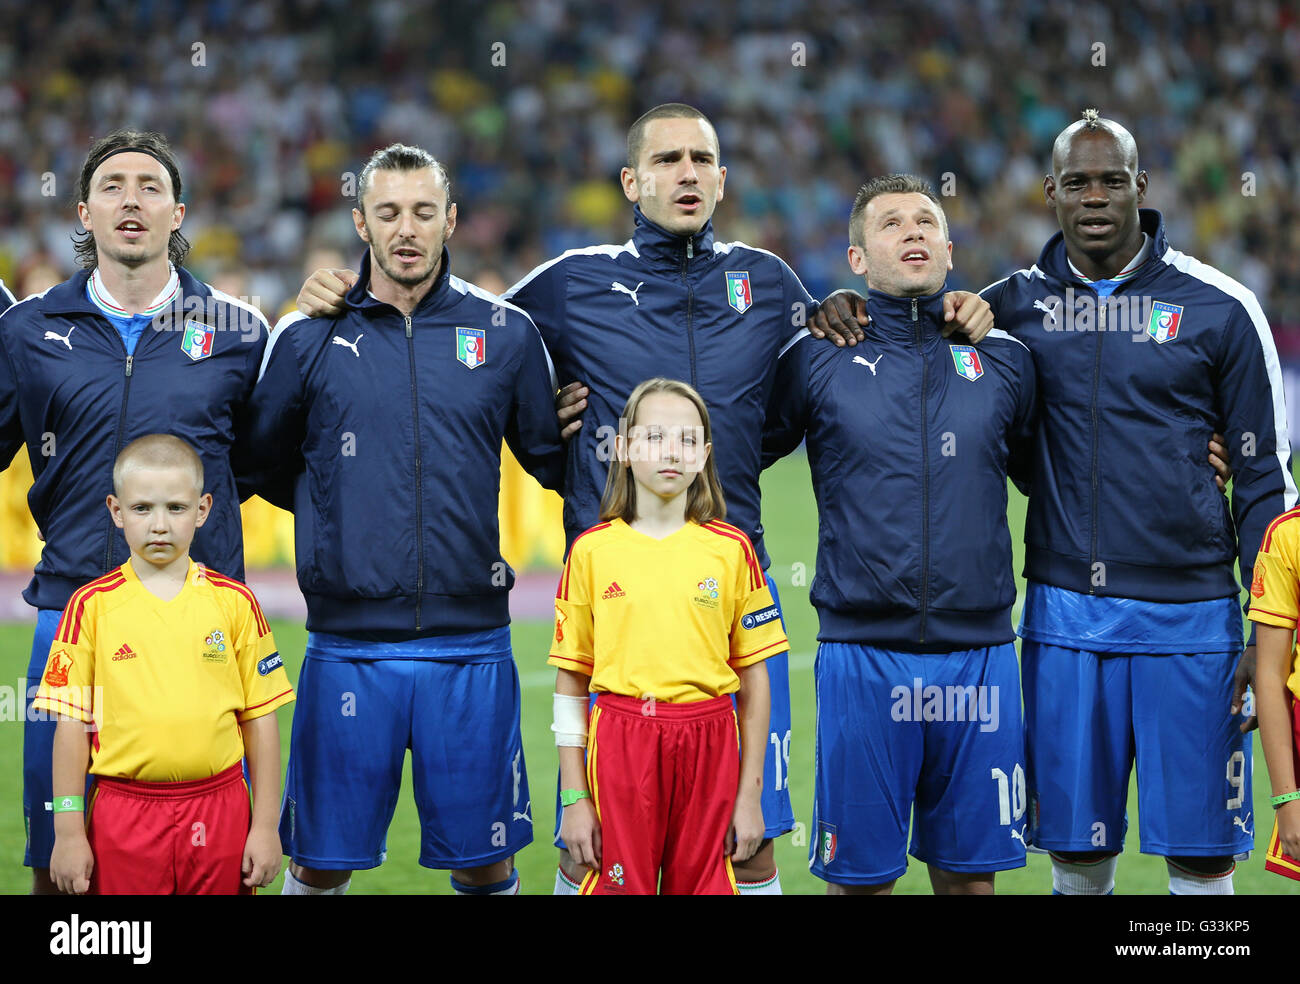 KYIV, UKRAINE - JUNE 24, 2012: Players of Italy football team sing the national anthen before UEFA EURO 2012 Quarter-final game Stock Photo